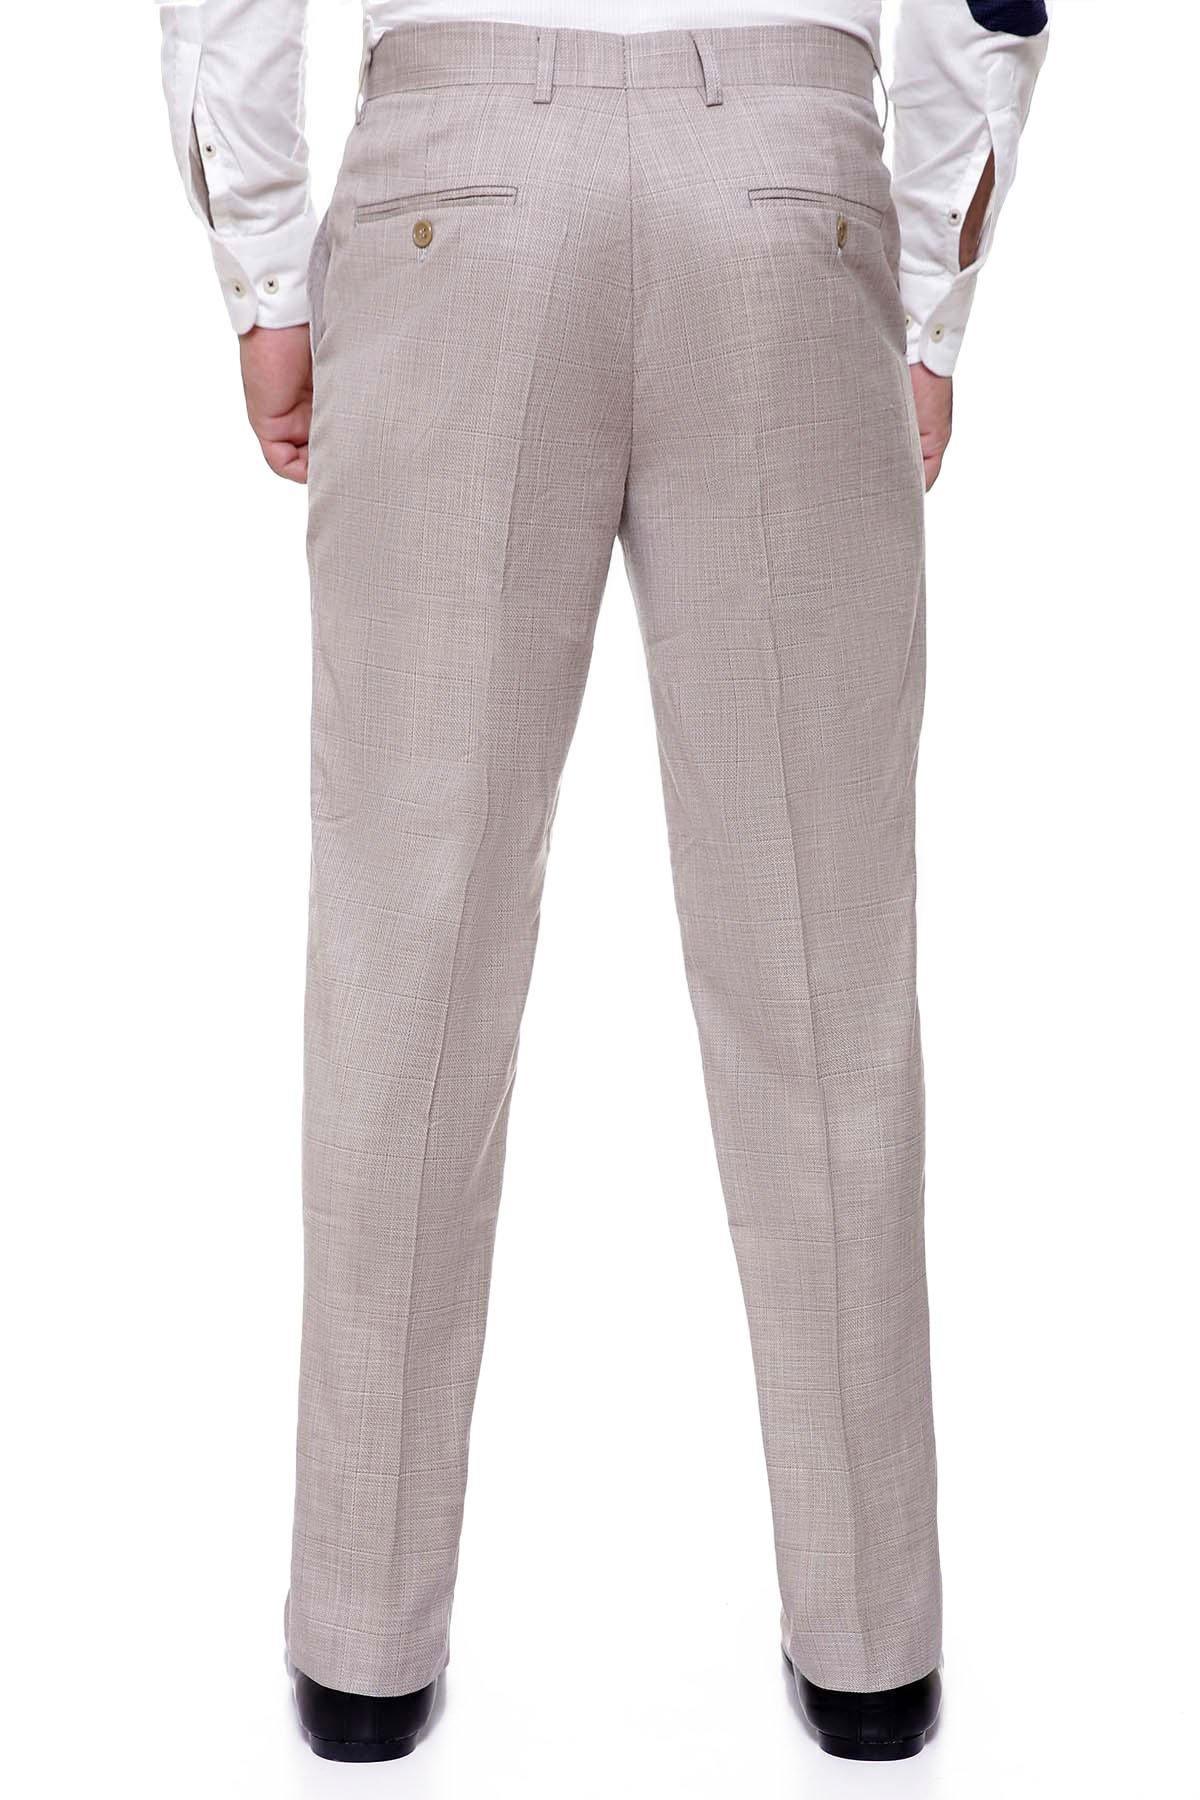 Dress Pant Smart fit Light Brown at Charcoal Clothing